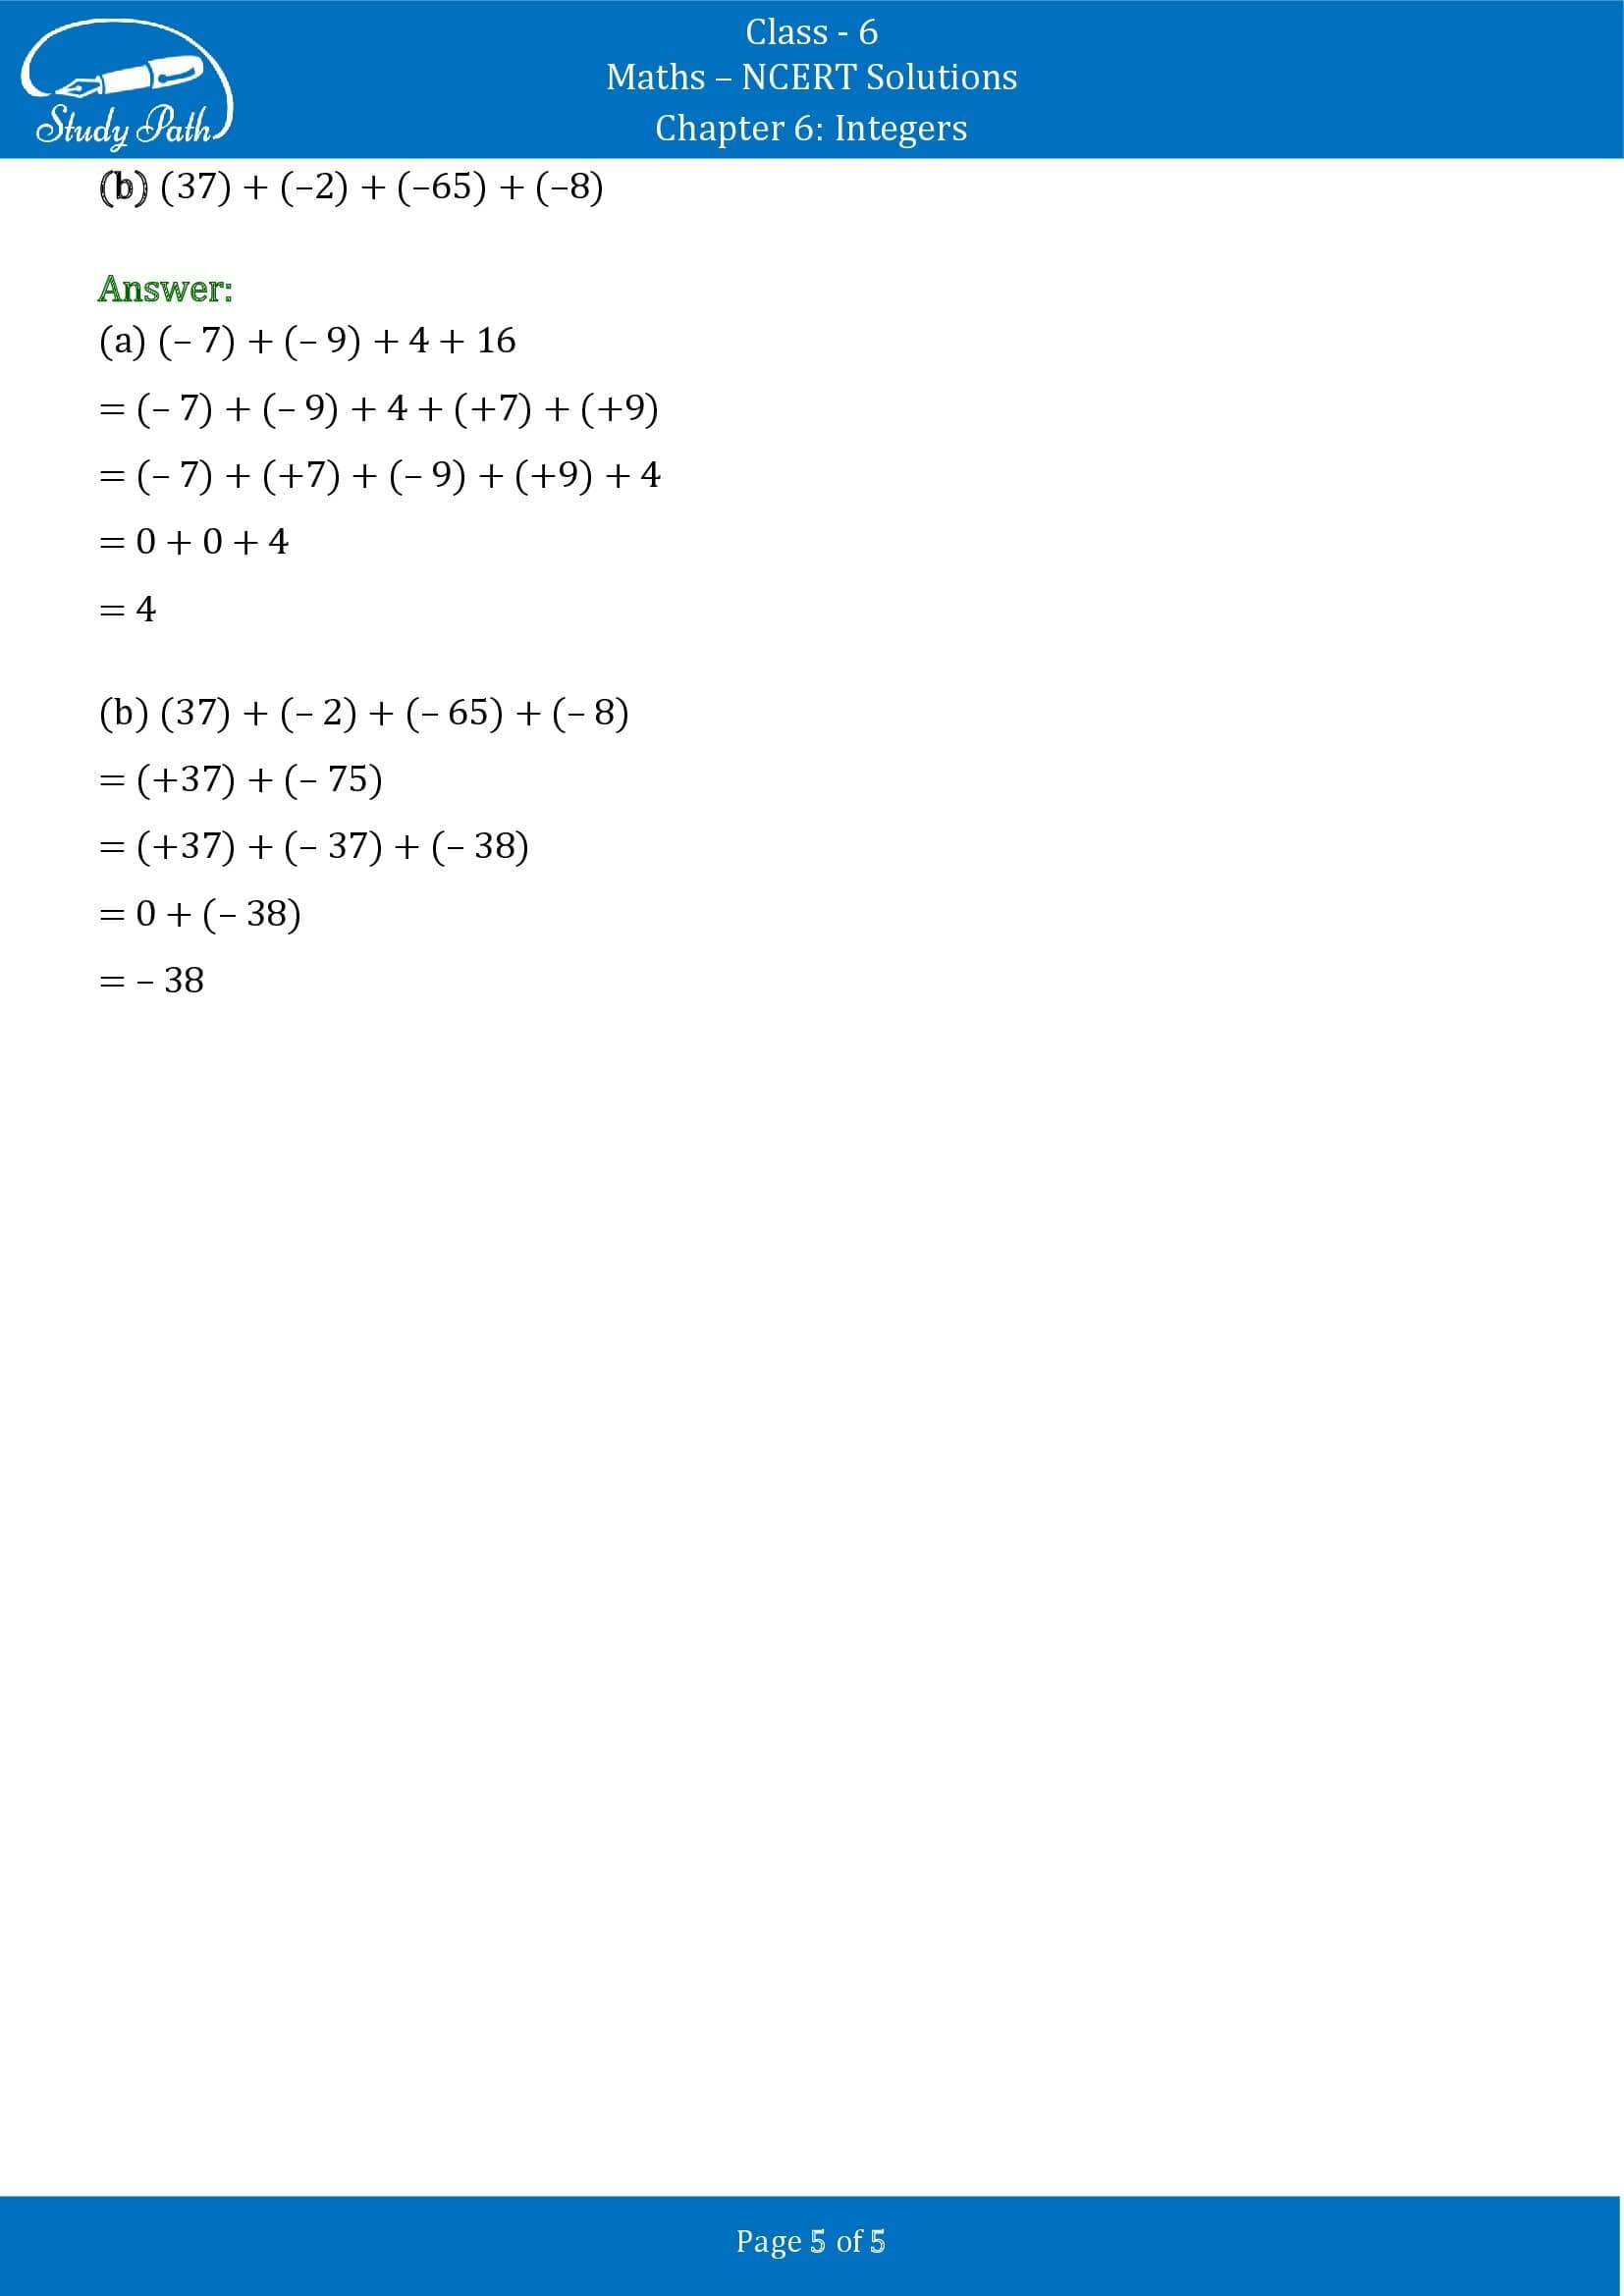 NCERT Solutions for Class 6 Maths Chapter 6 Integers Exercise 6.2 00005